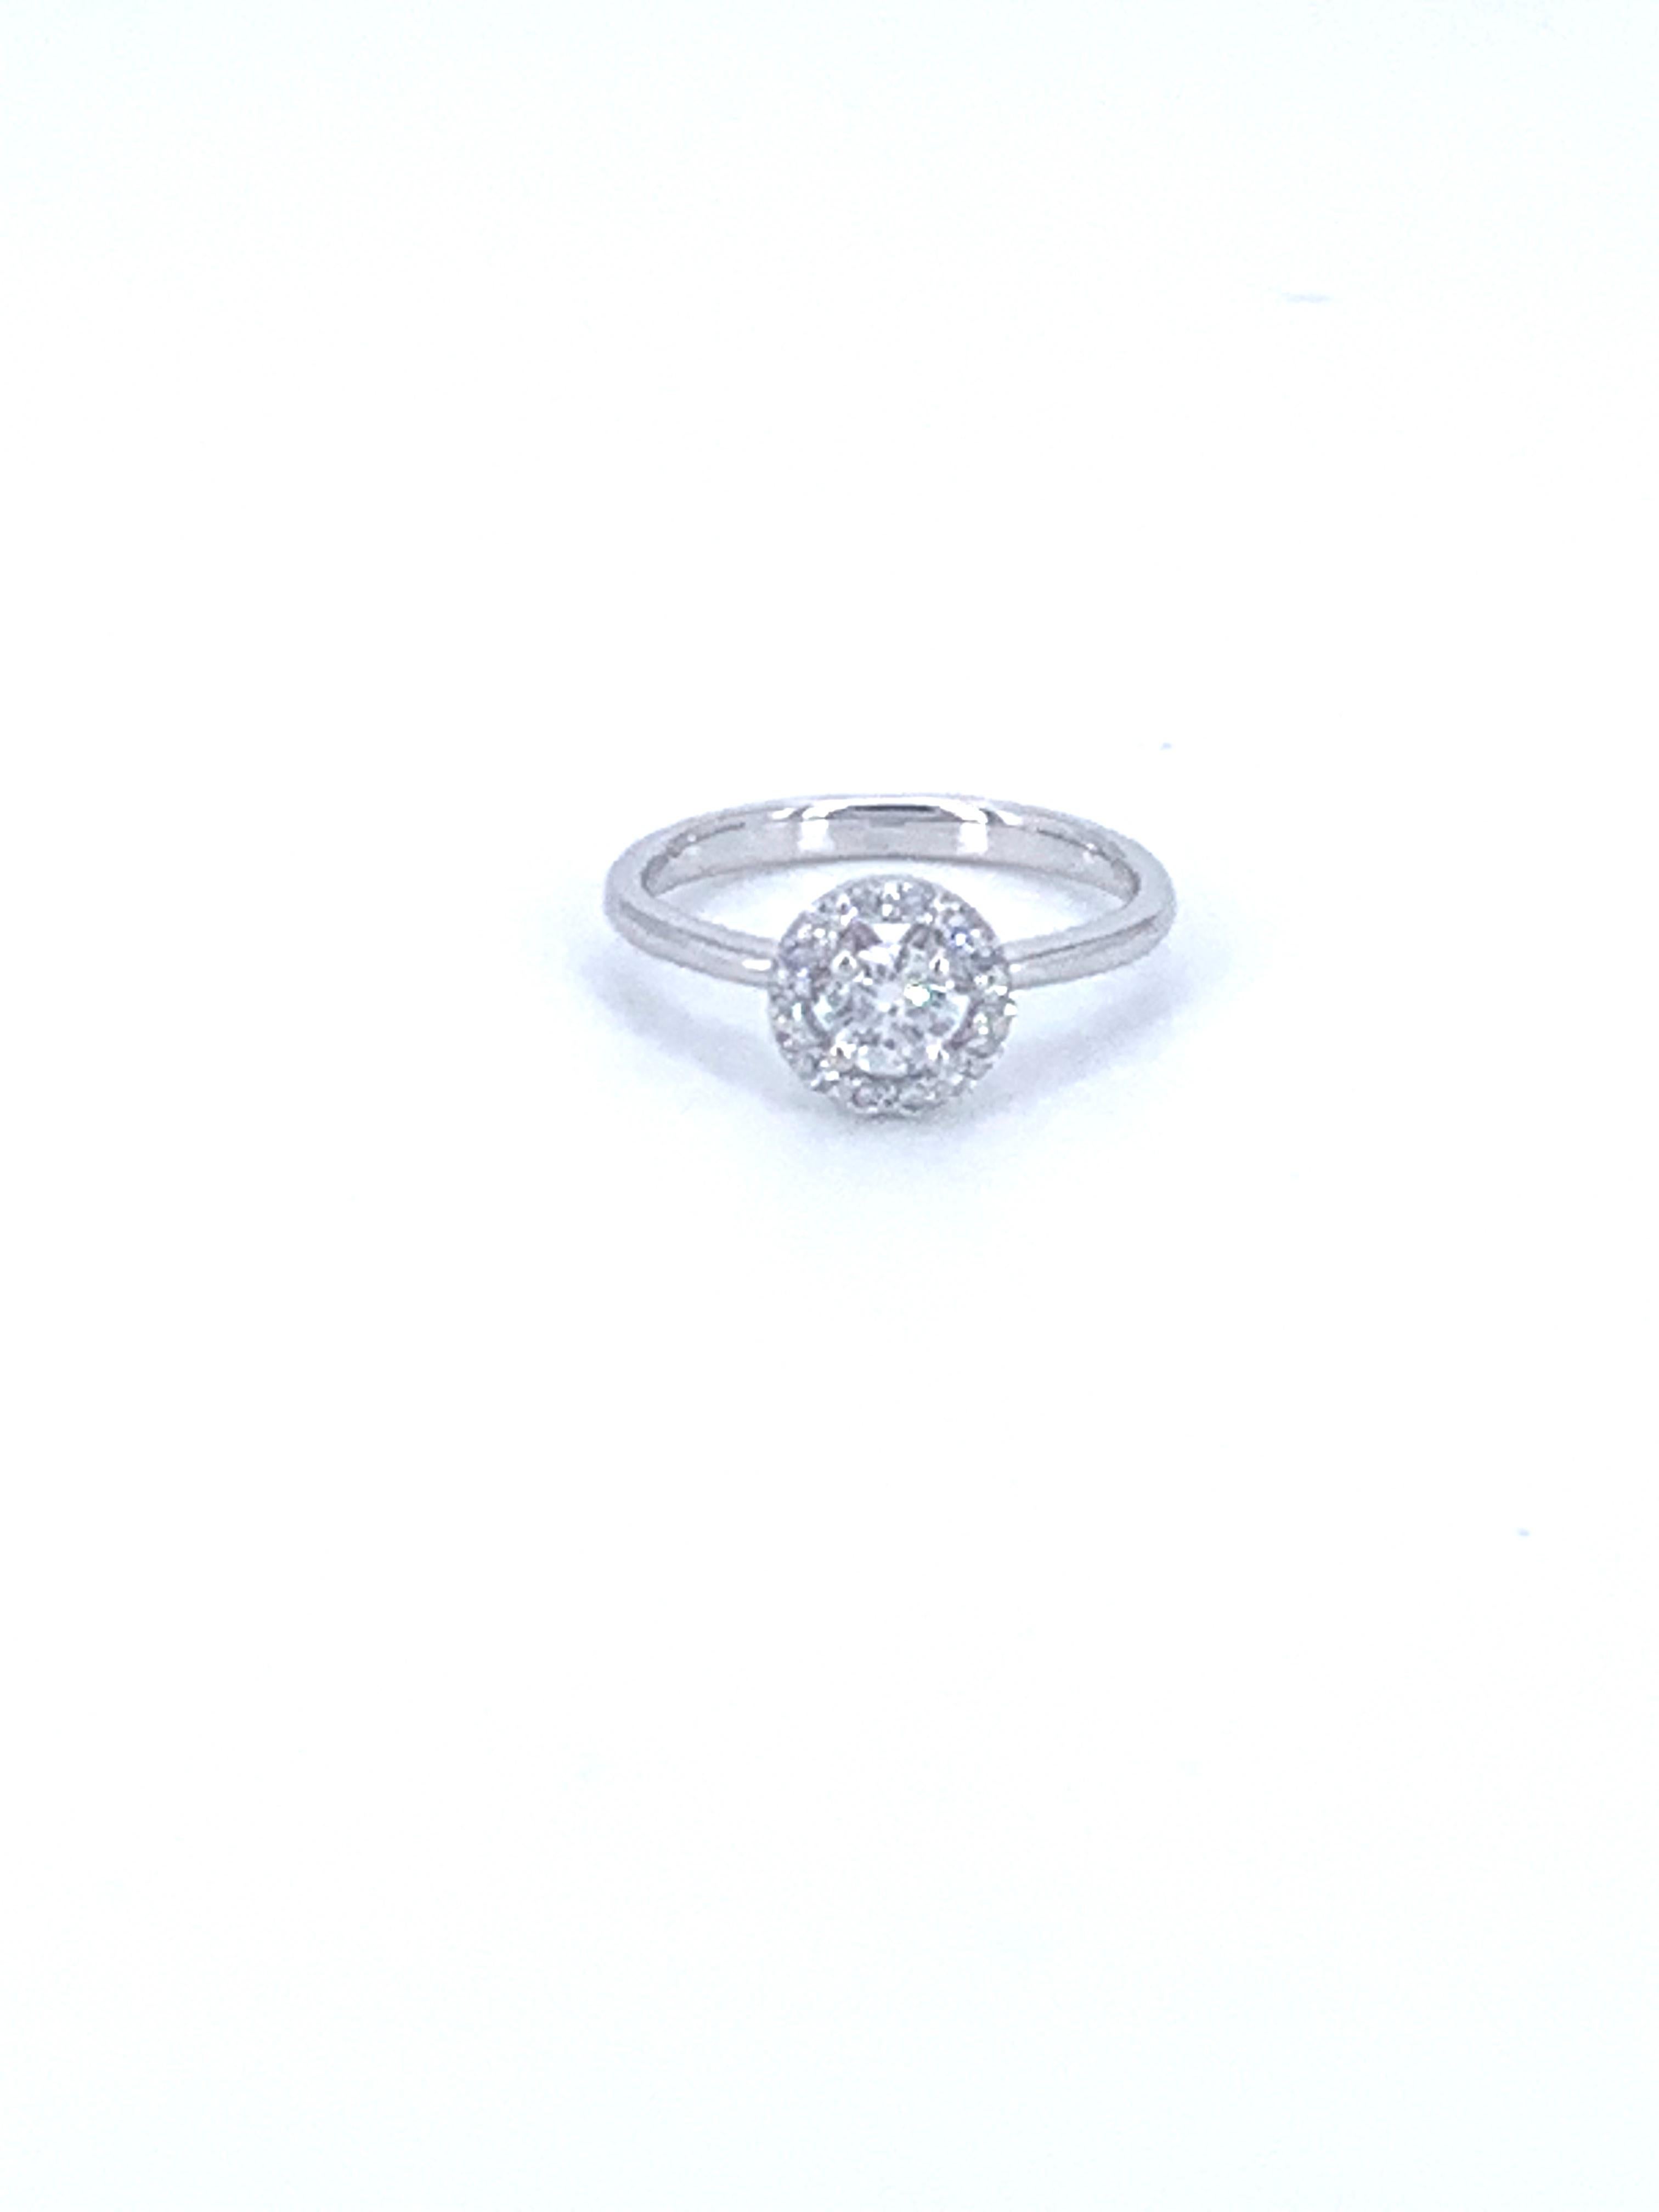 This Halo solitaire 0.57 Carat diamond ring, is from the Jennifer Collection and is set in 18Kt white Gold. 

Beautifully it can dress any finger adding glamour and style to the hand. The perfect gift to one self or a loved one. 

Crafted so the